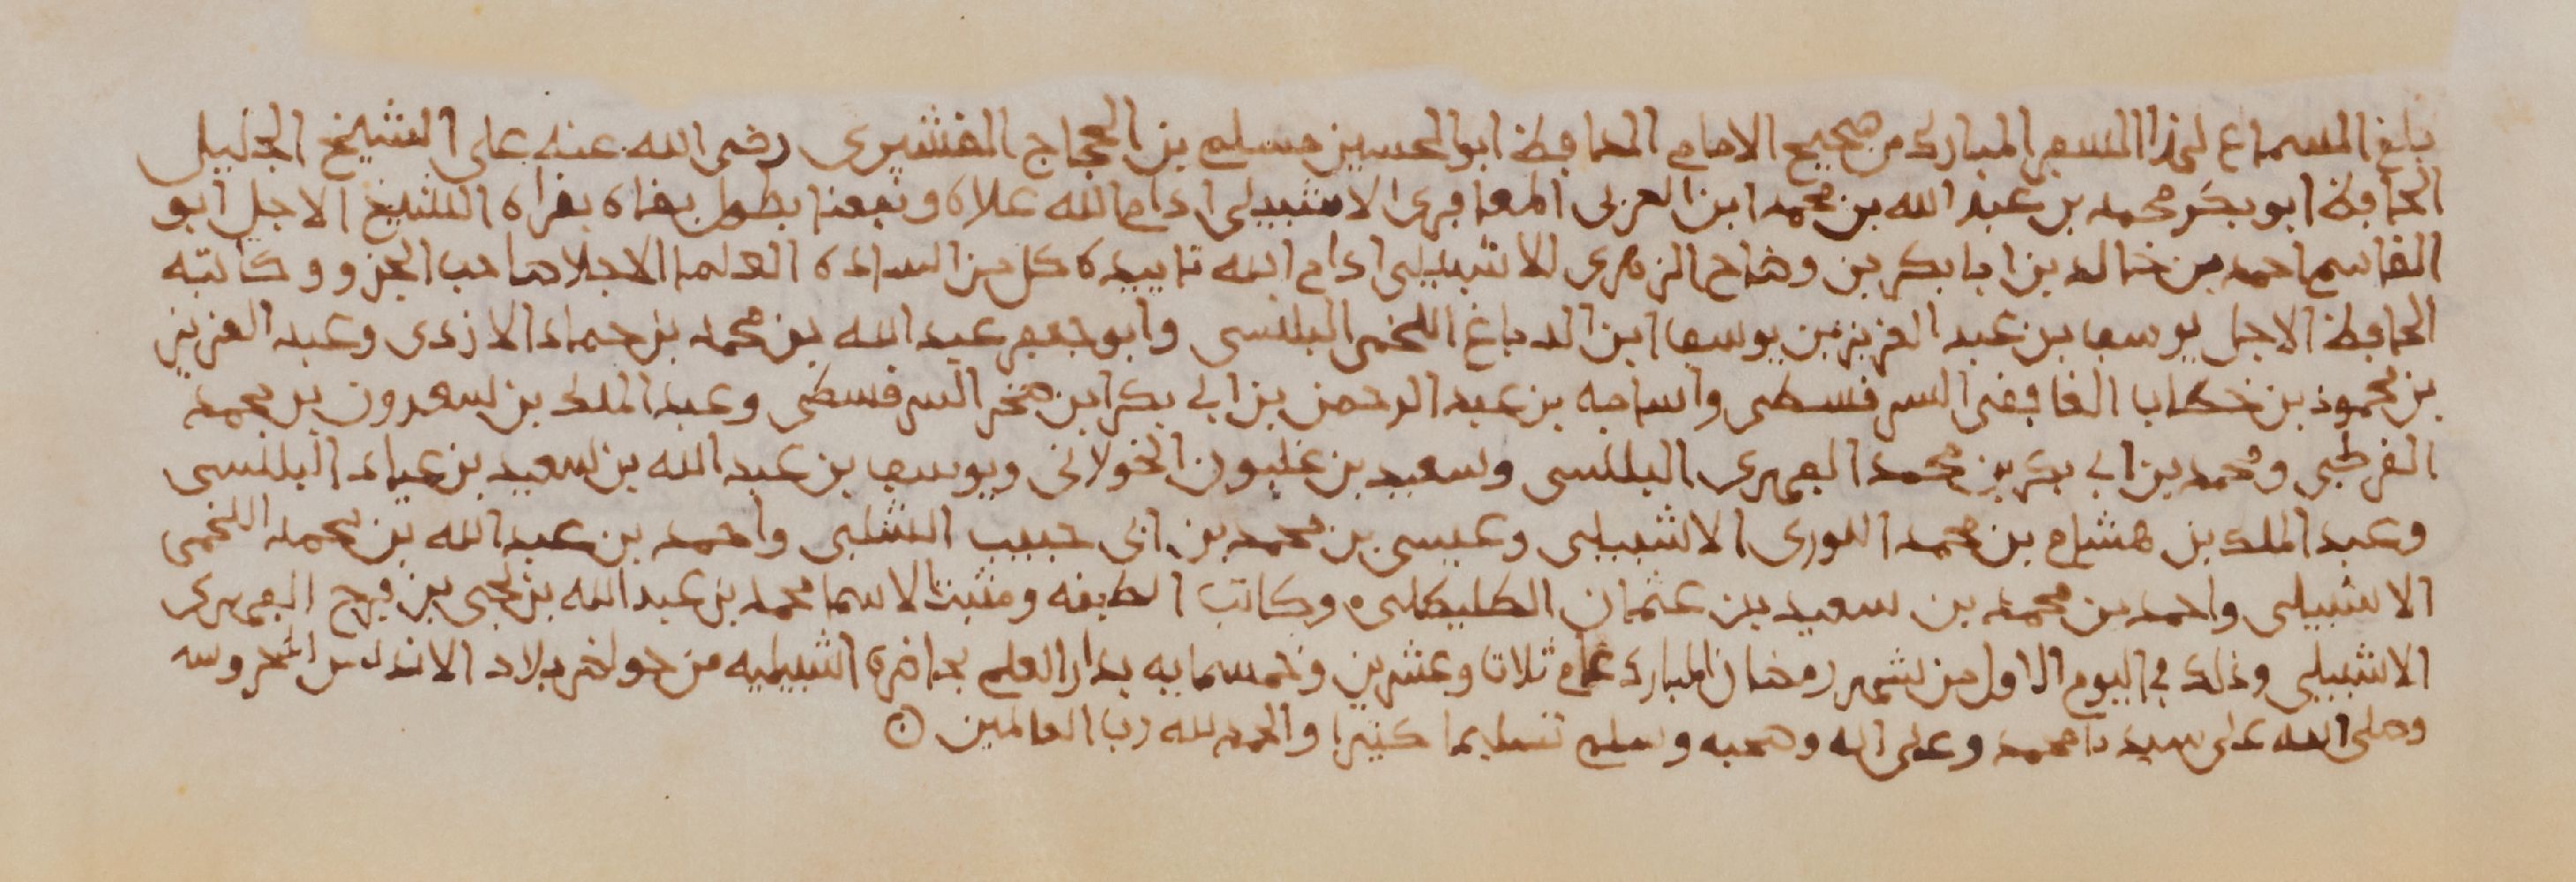 Ɵ Abu Bakr ibn al-Arabi, work of Maliki Fiqh, possibly his commentary on Tirmidh's Hadith Collection - Image 3 of 4